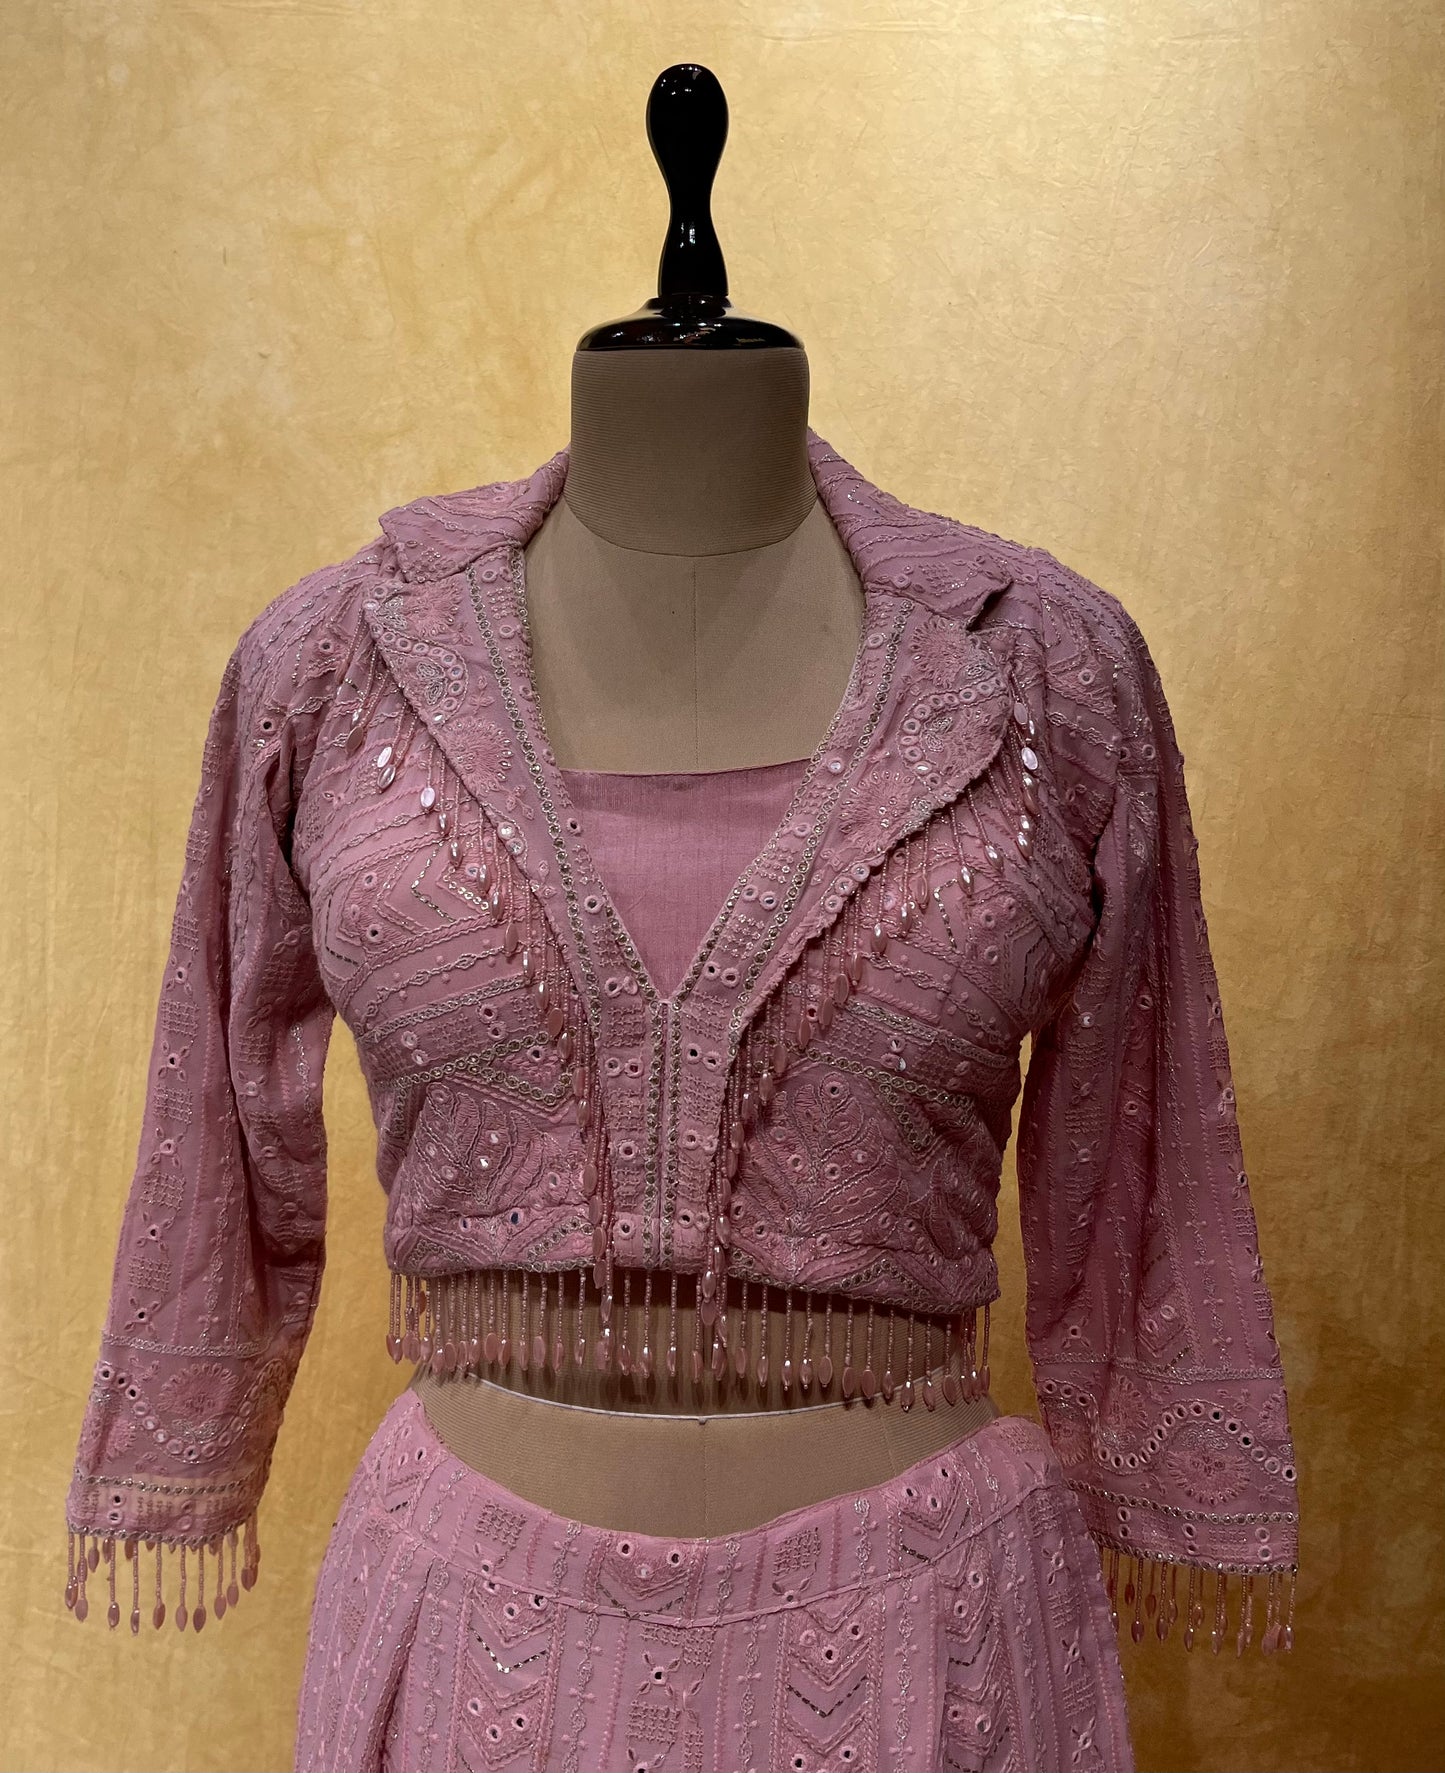 PINK COLOR GEORGETTE CHIKANKARI PALAZZO PANT WITH CROP TOP BLOUSE EMBELLISHED WITH MIRROR FOIL WORK